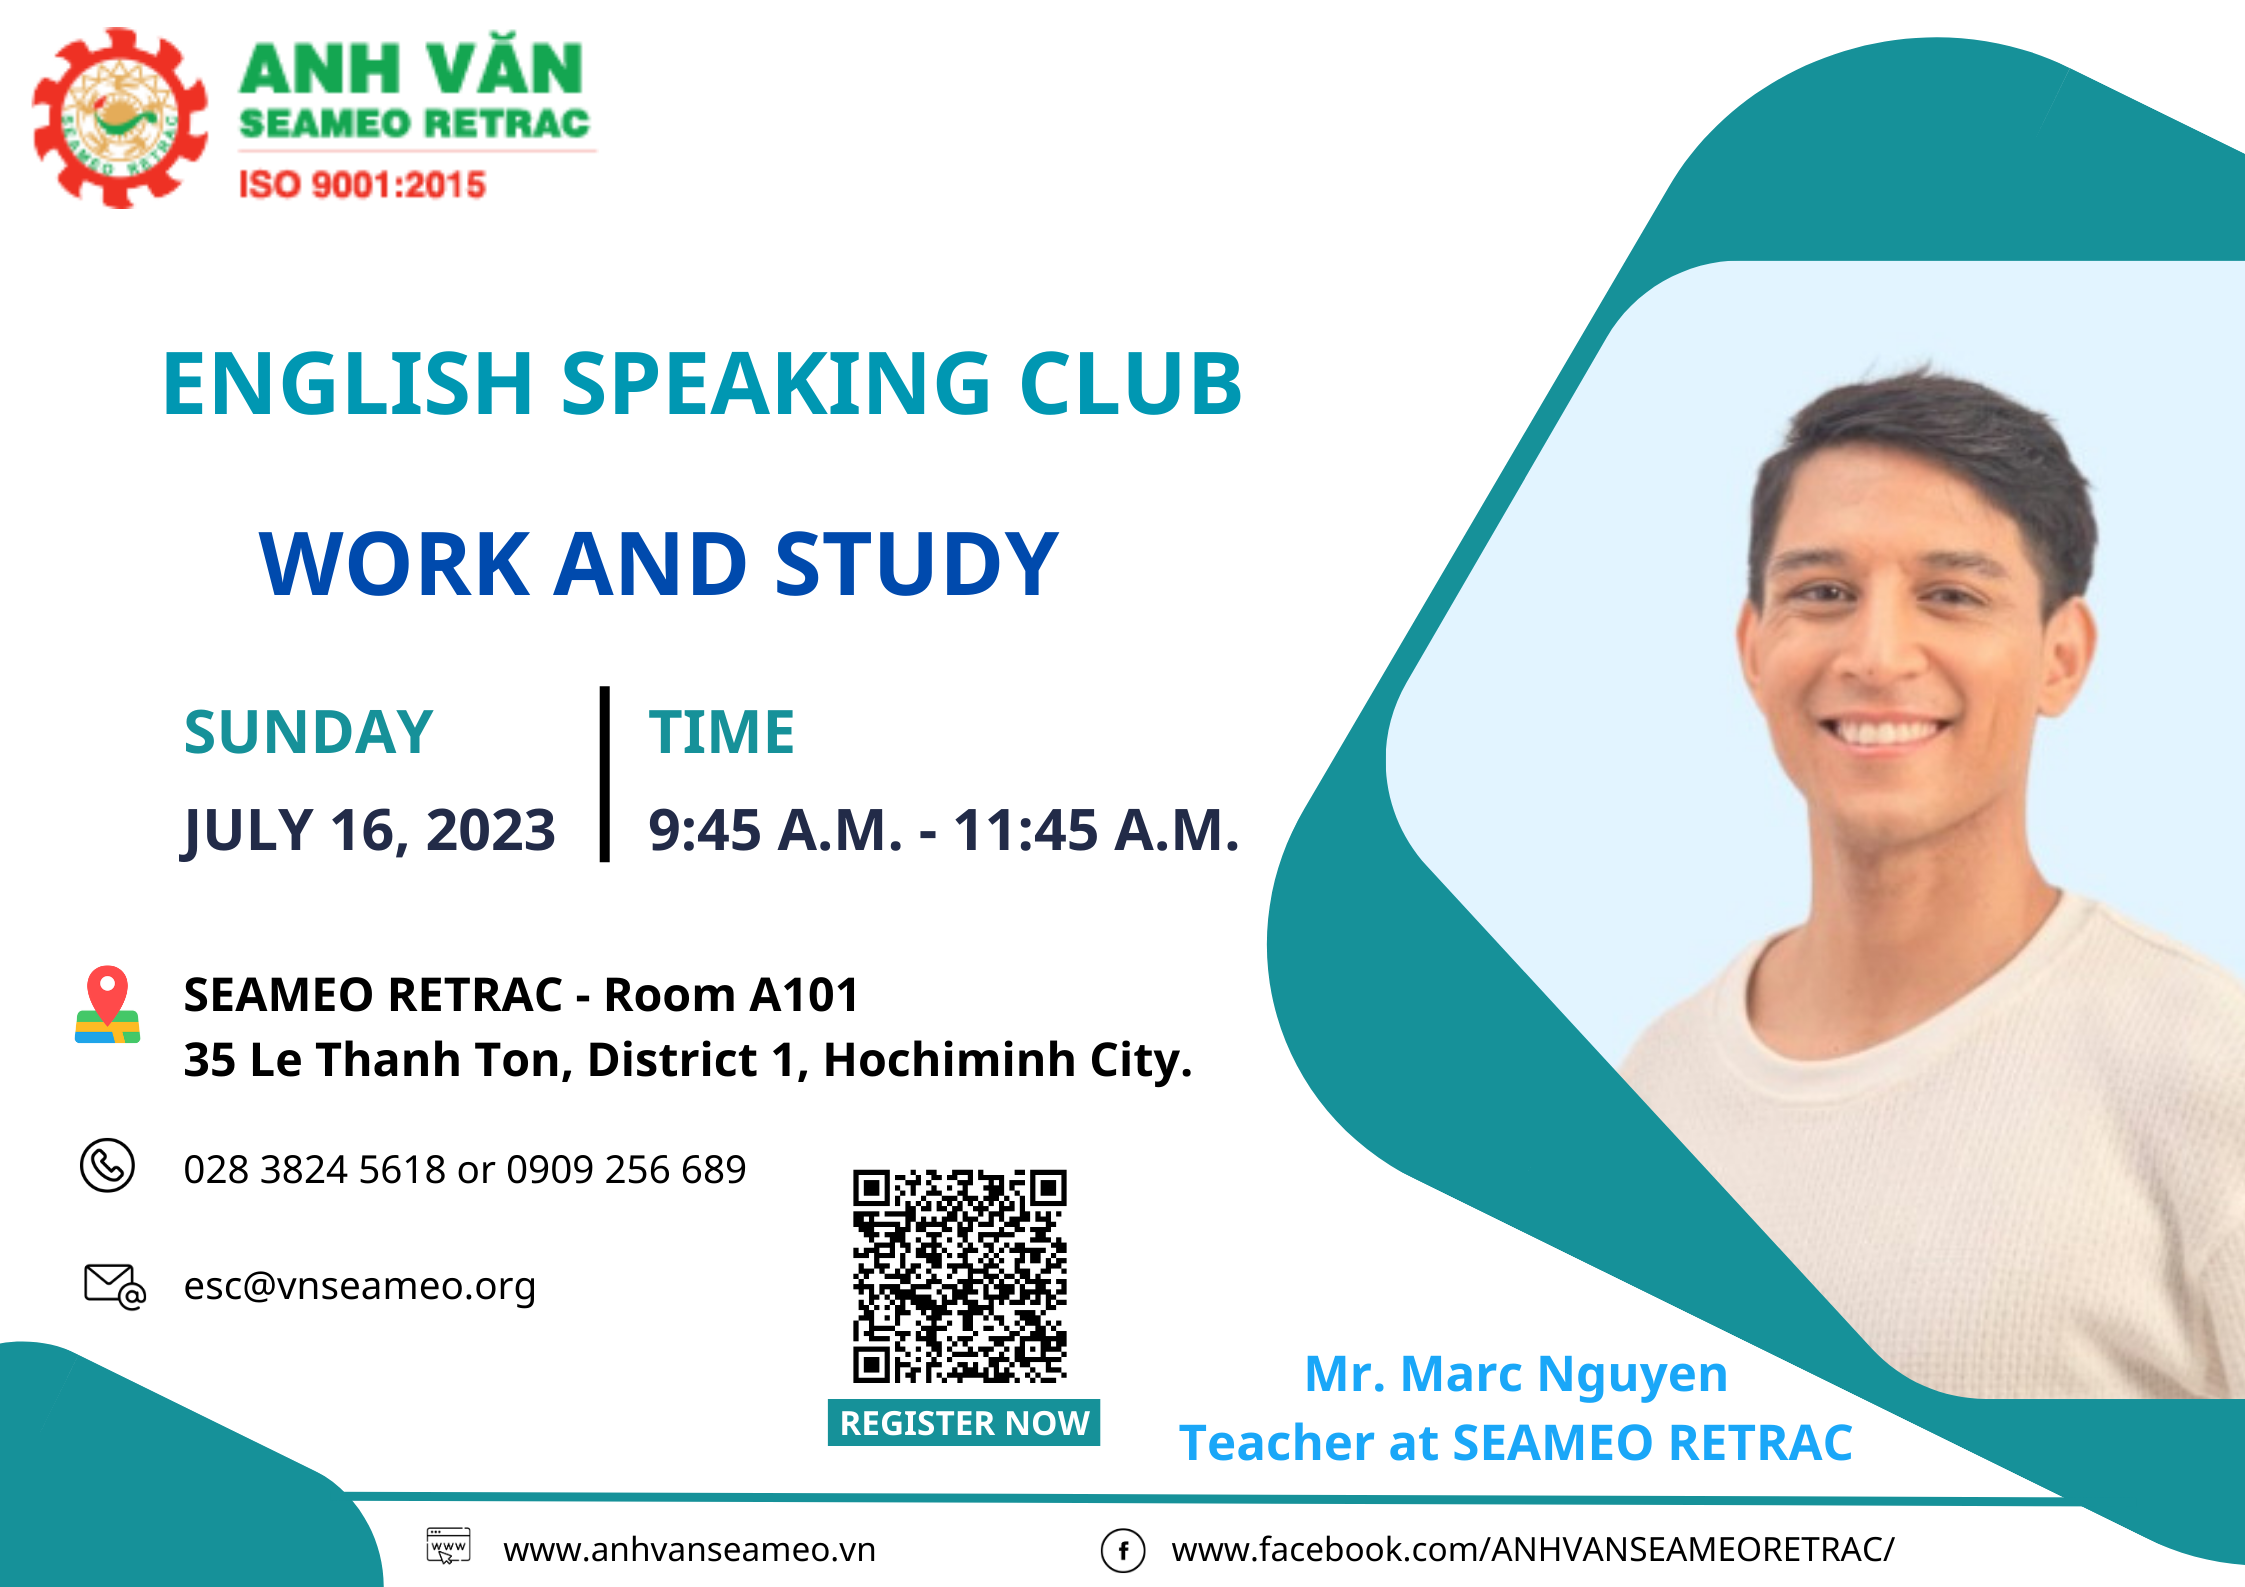 English Speaking Club titled “Work and Study”